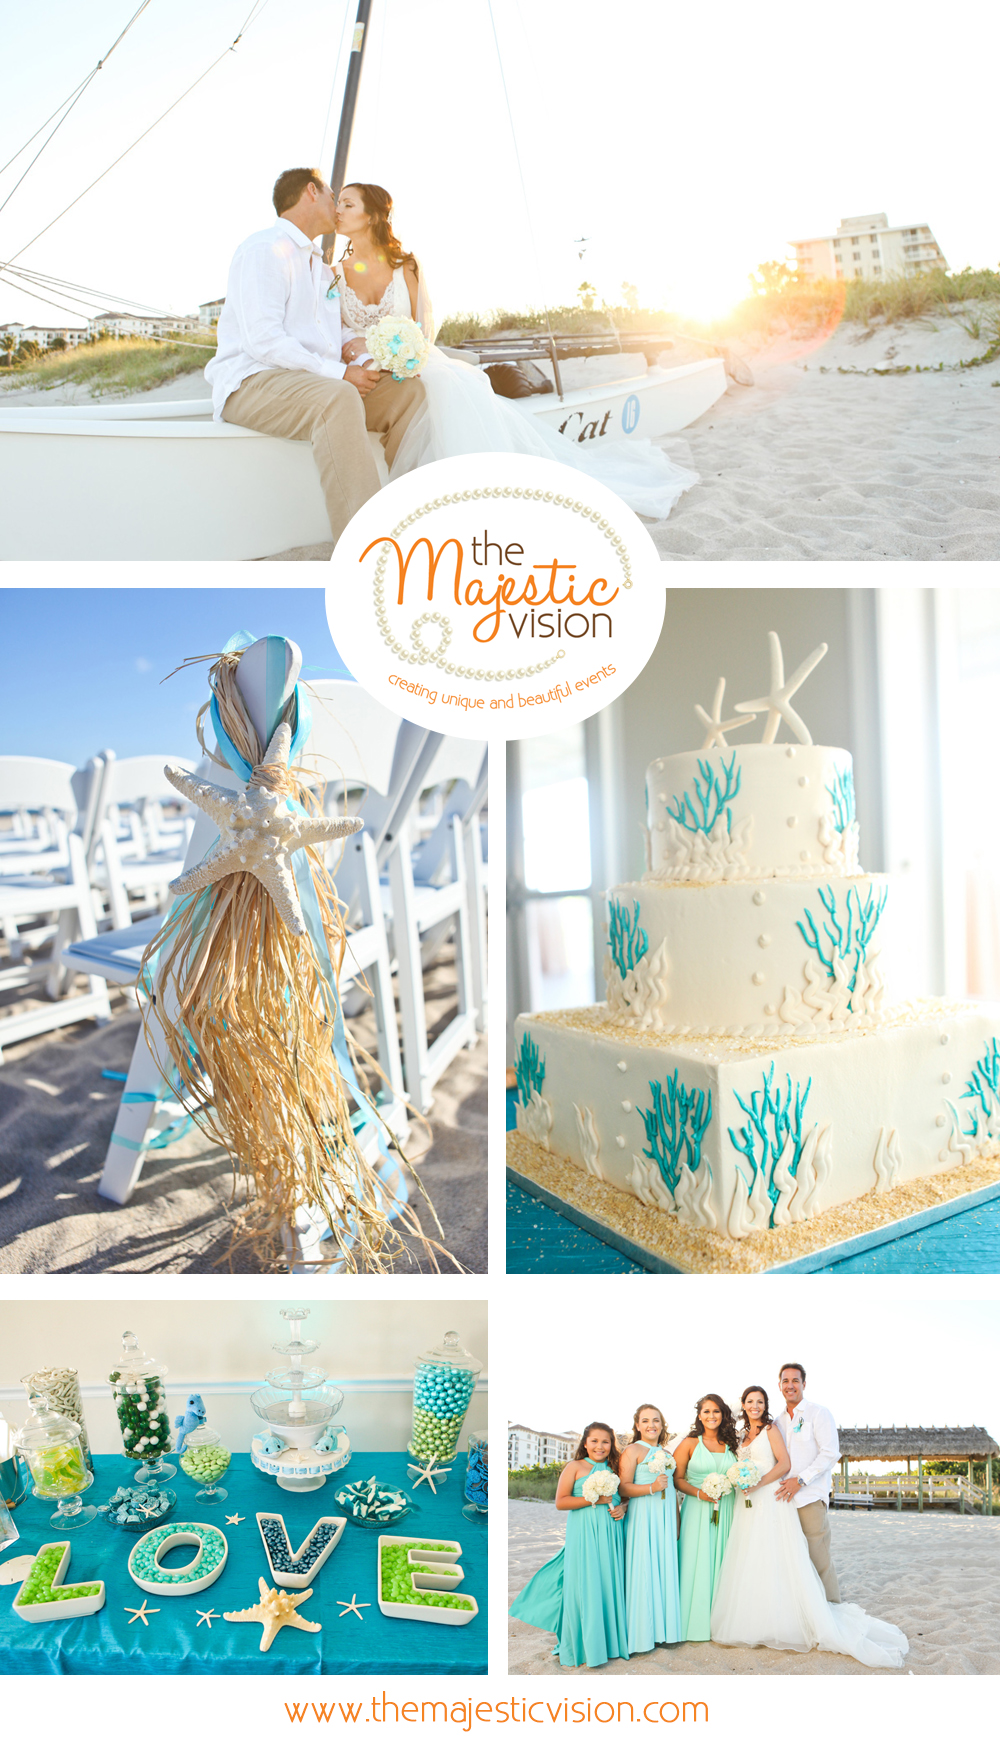 Whimsical and Elegant Beach Wedding | The Majestic Vision Wedding Planning | Palm Beach Shores in Palm Beach, FL | www.themajesticvision.com | Krystal Zaskey Photography